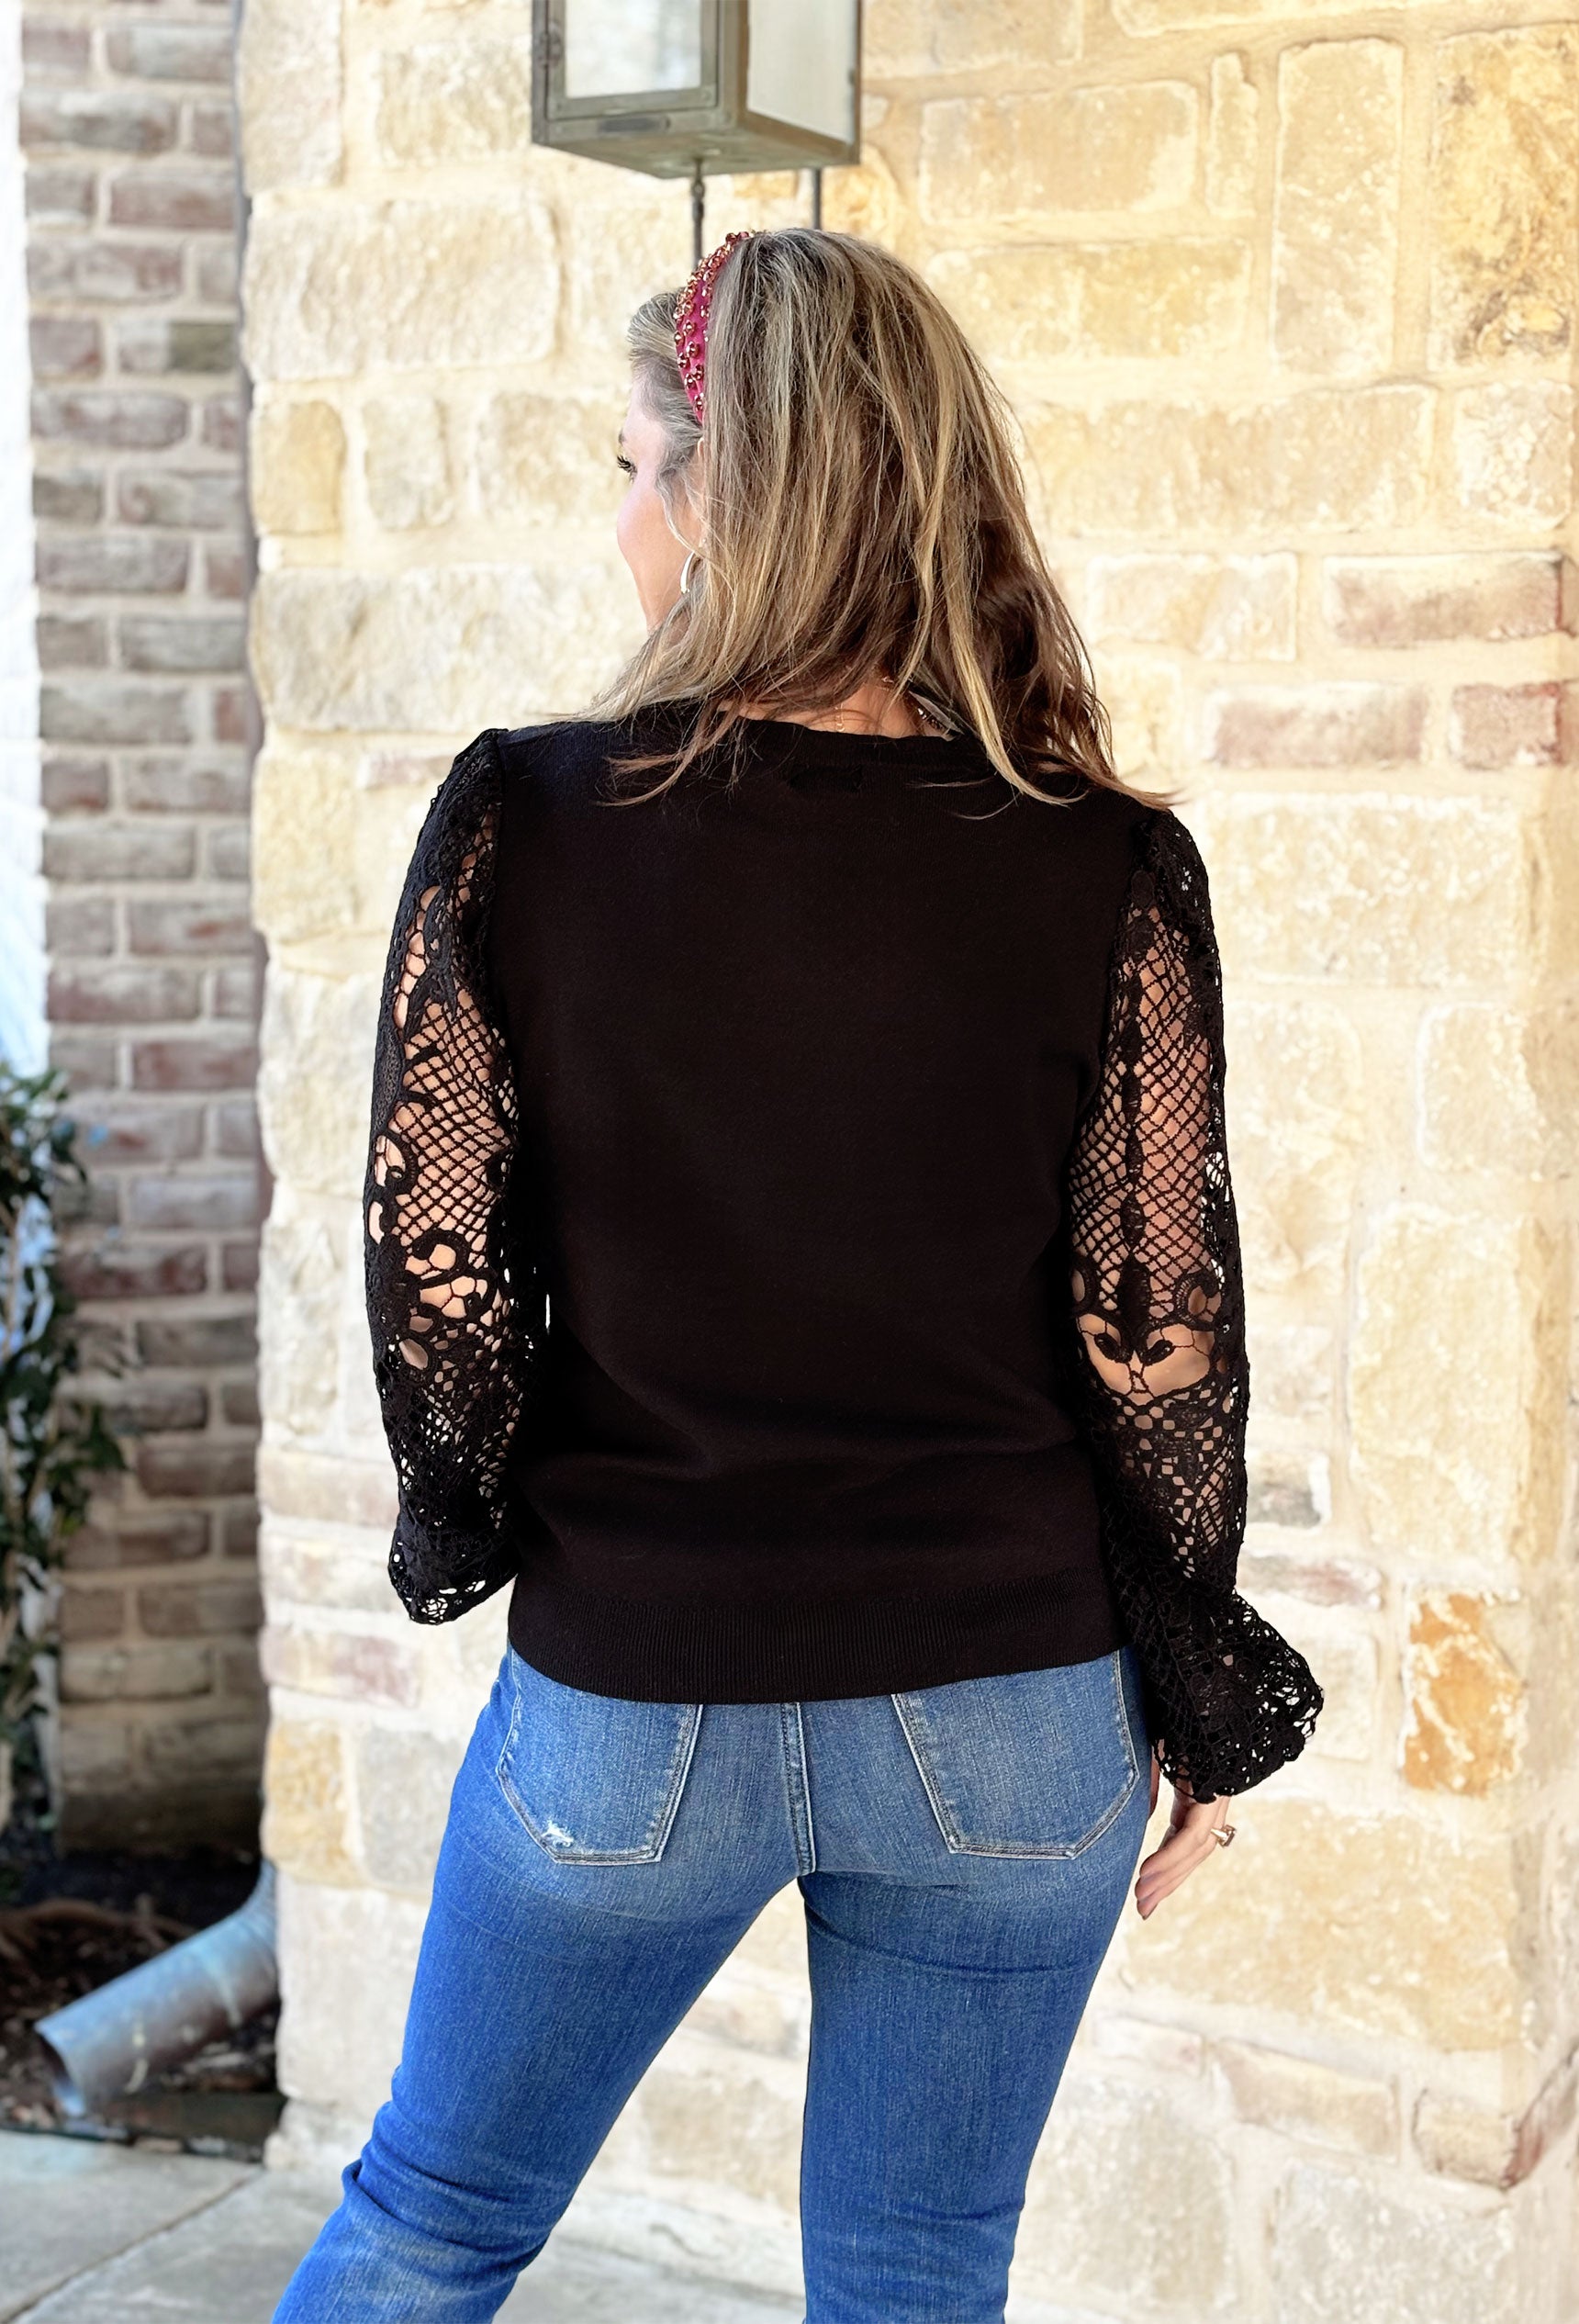 Everything Has Changed Top, black long sleeve top with lace sleeves 